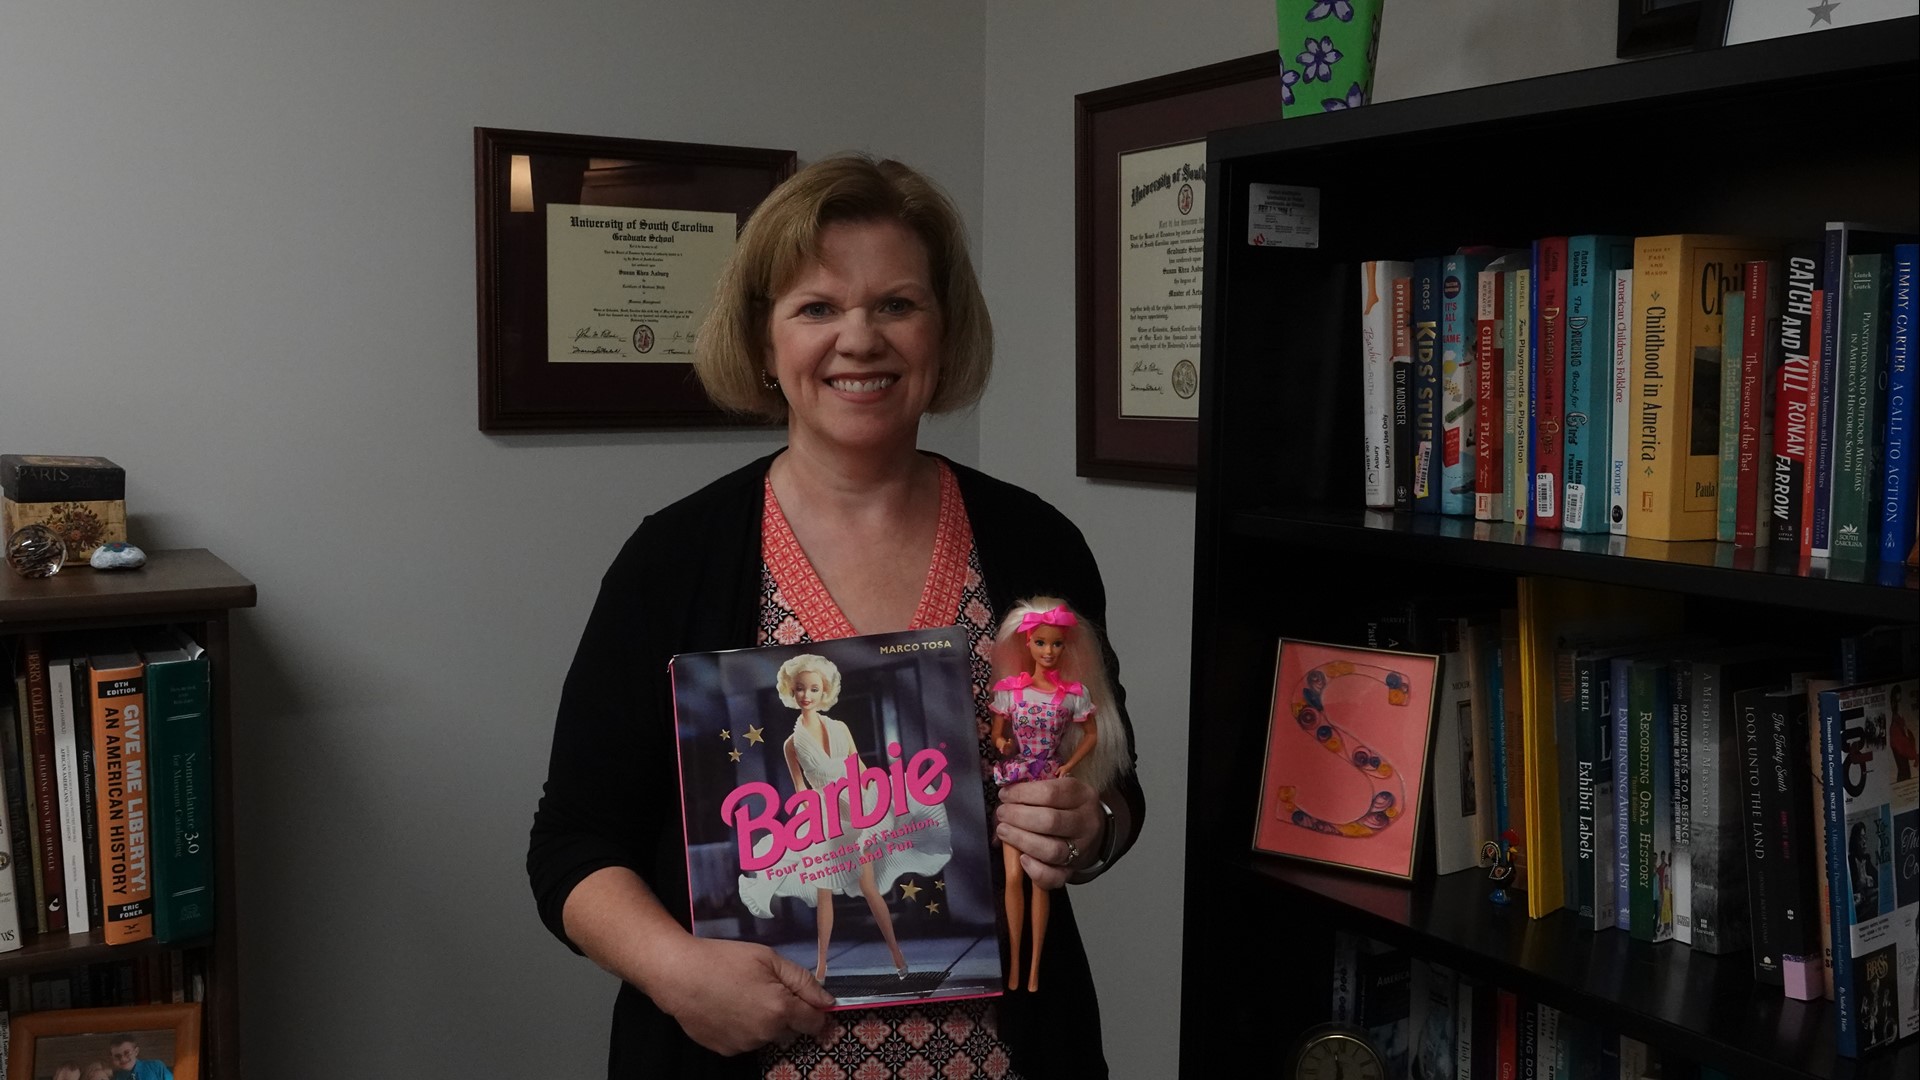 Dr. Susan Asbury says that the doll has always been an icon of imagination and inspiration for women.